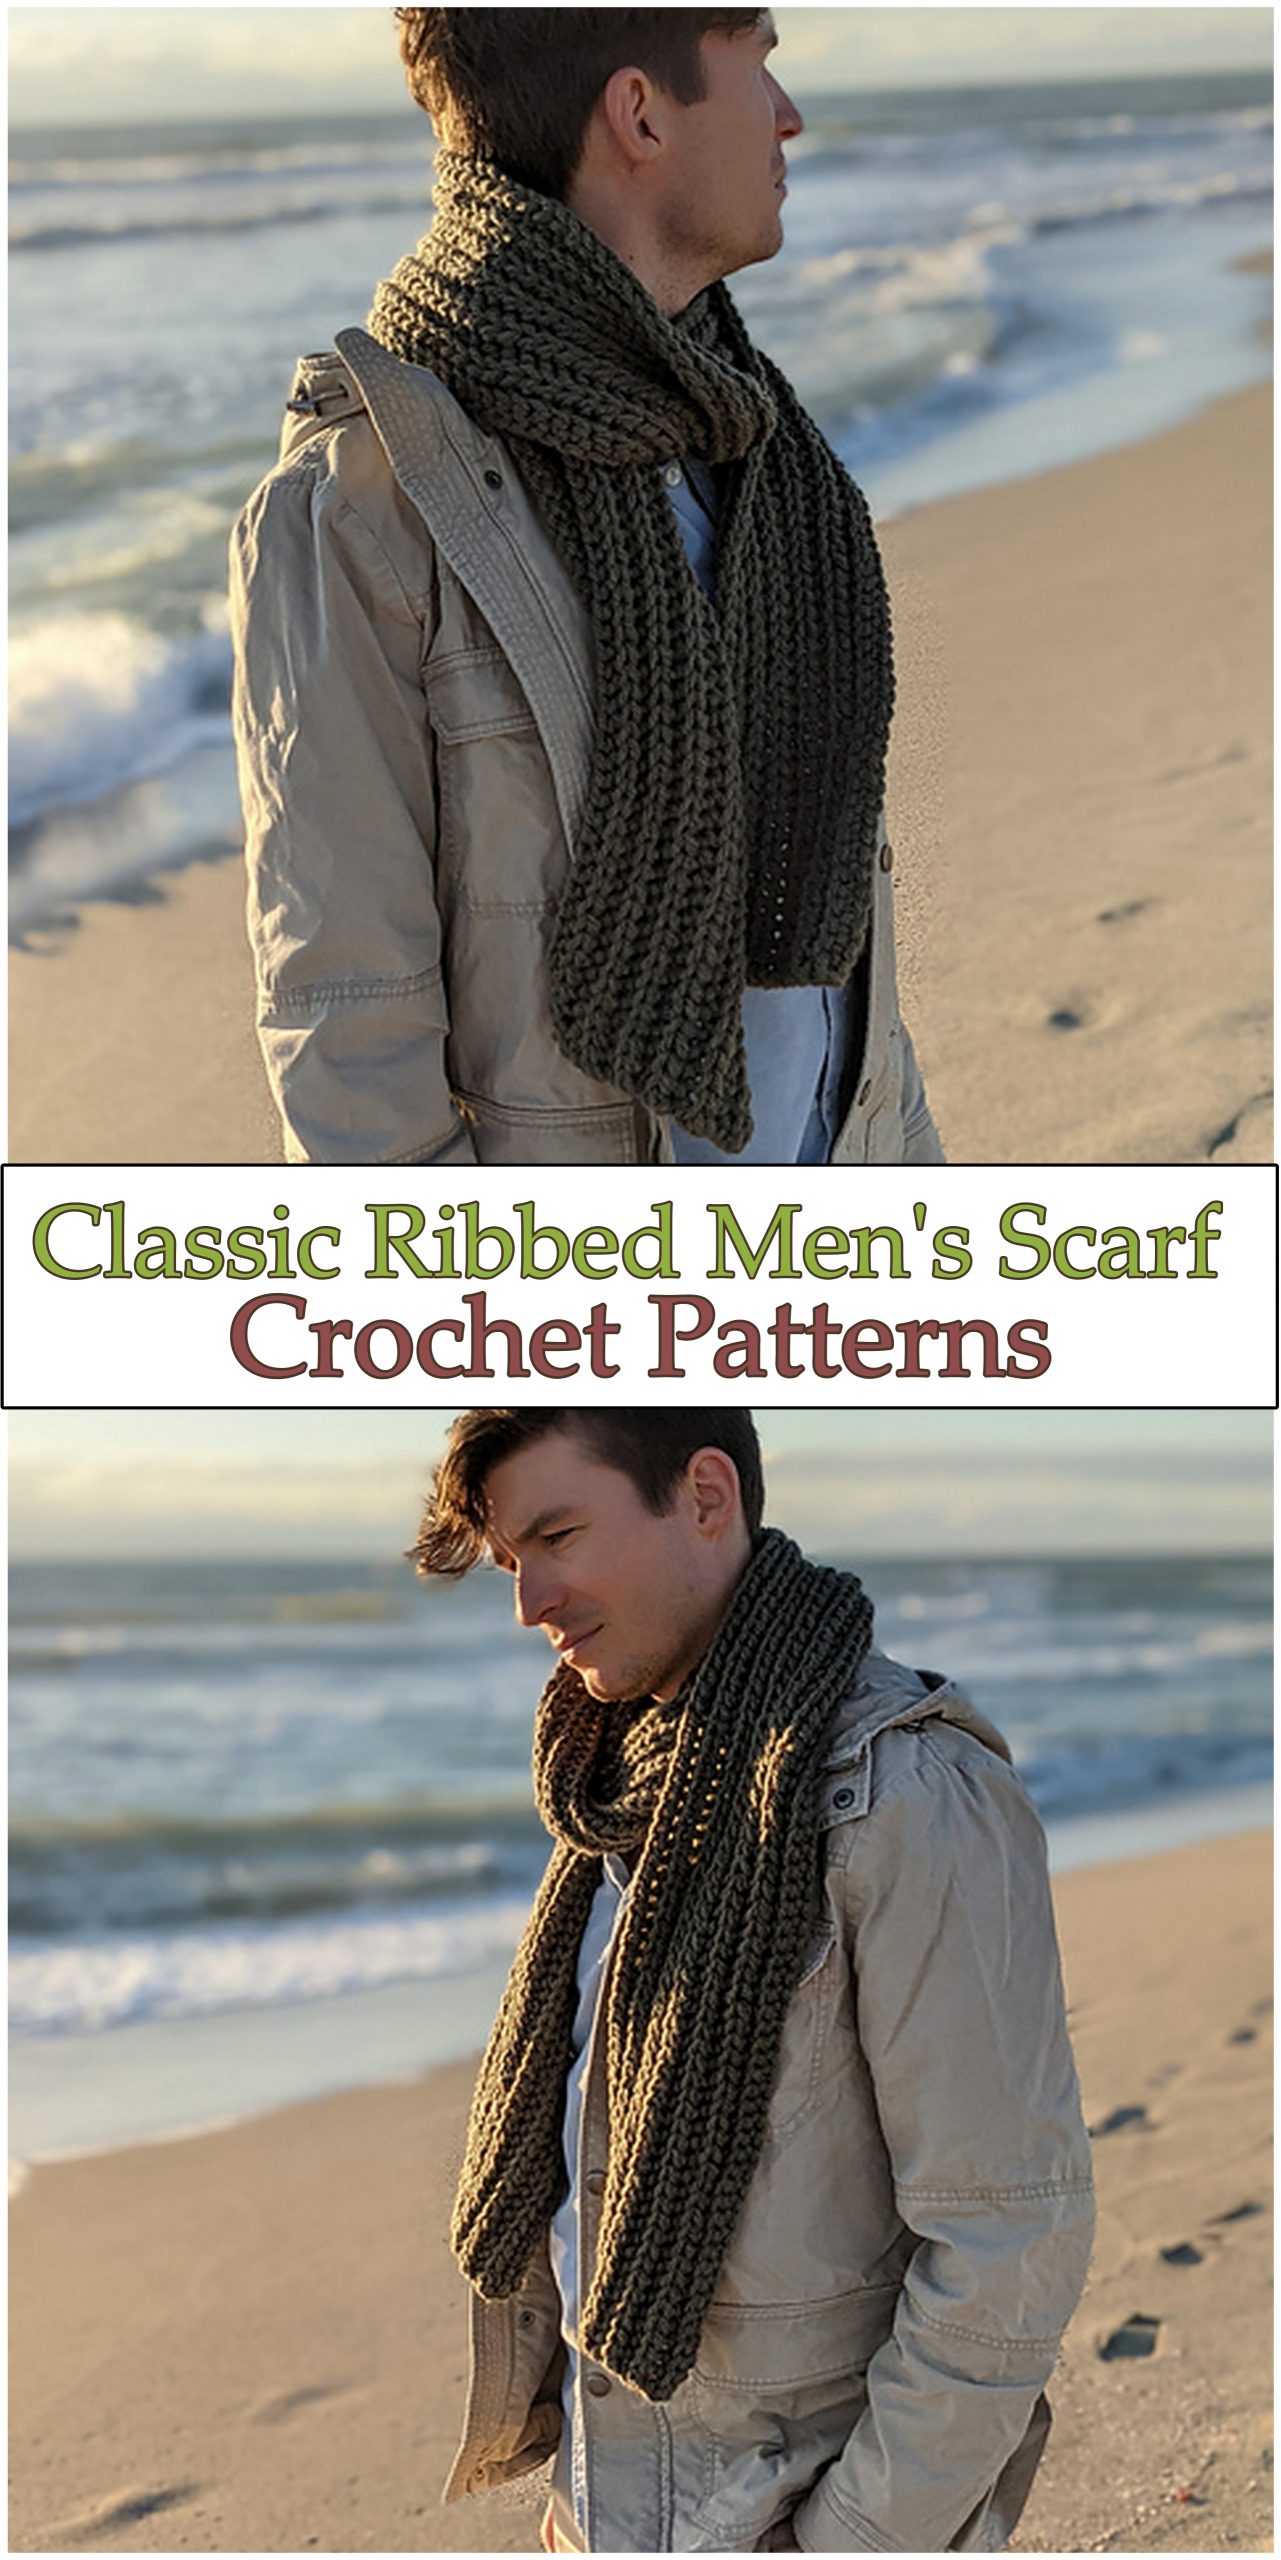 Classic Ribbed Men's Scarf